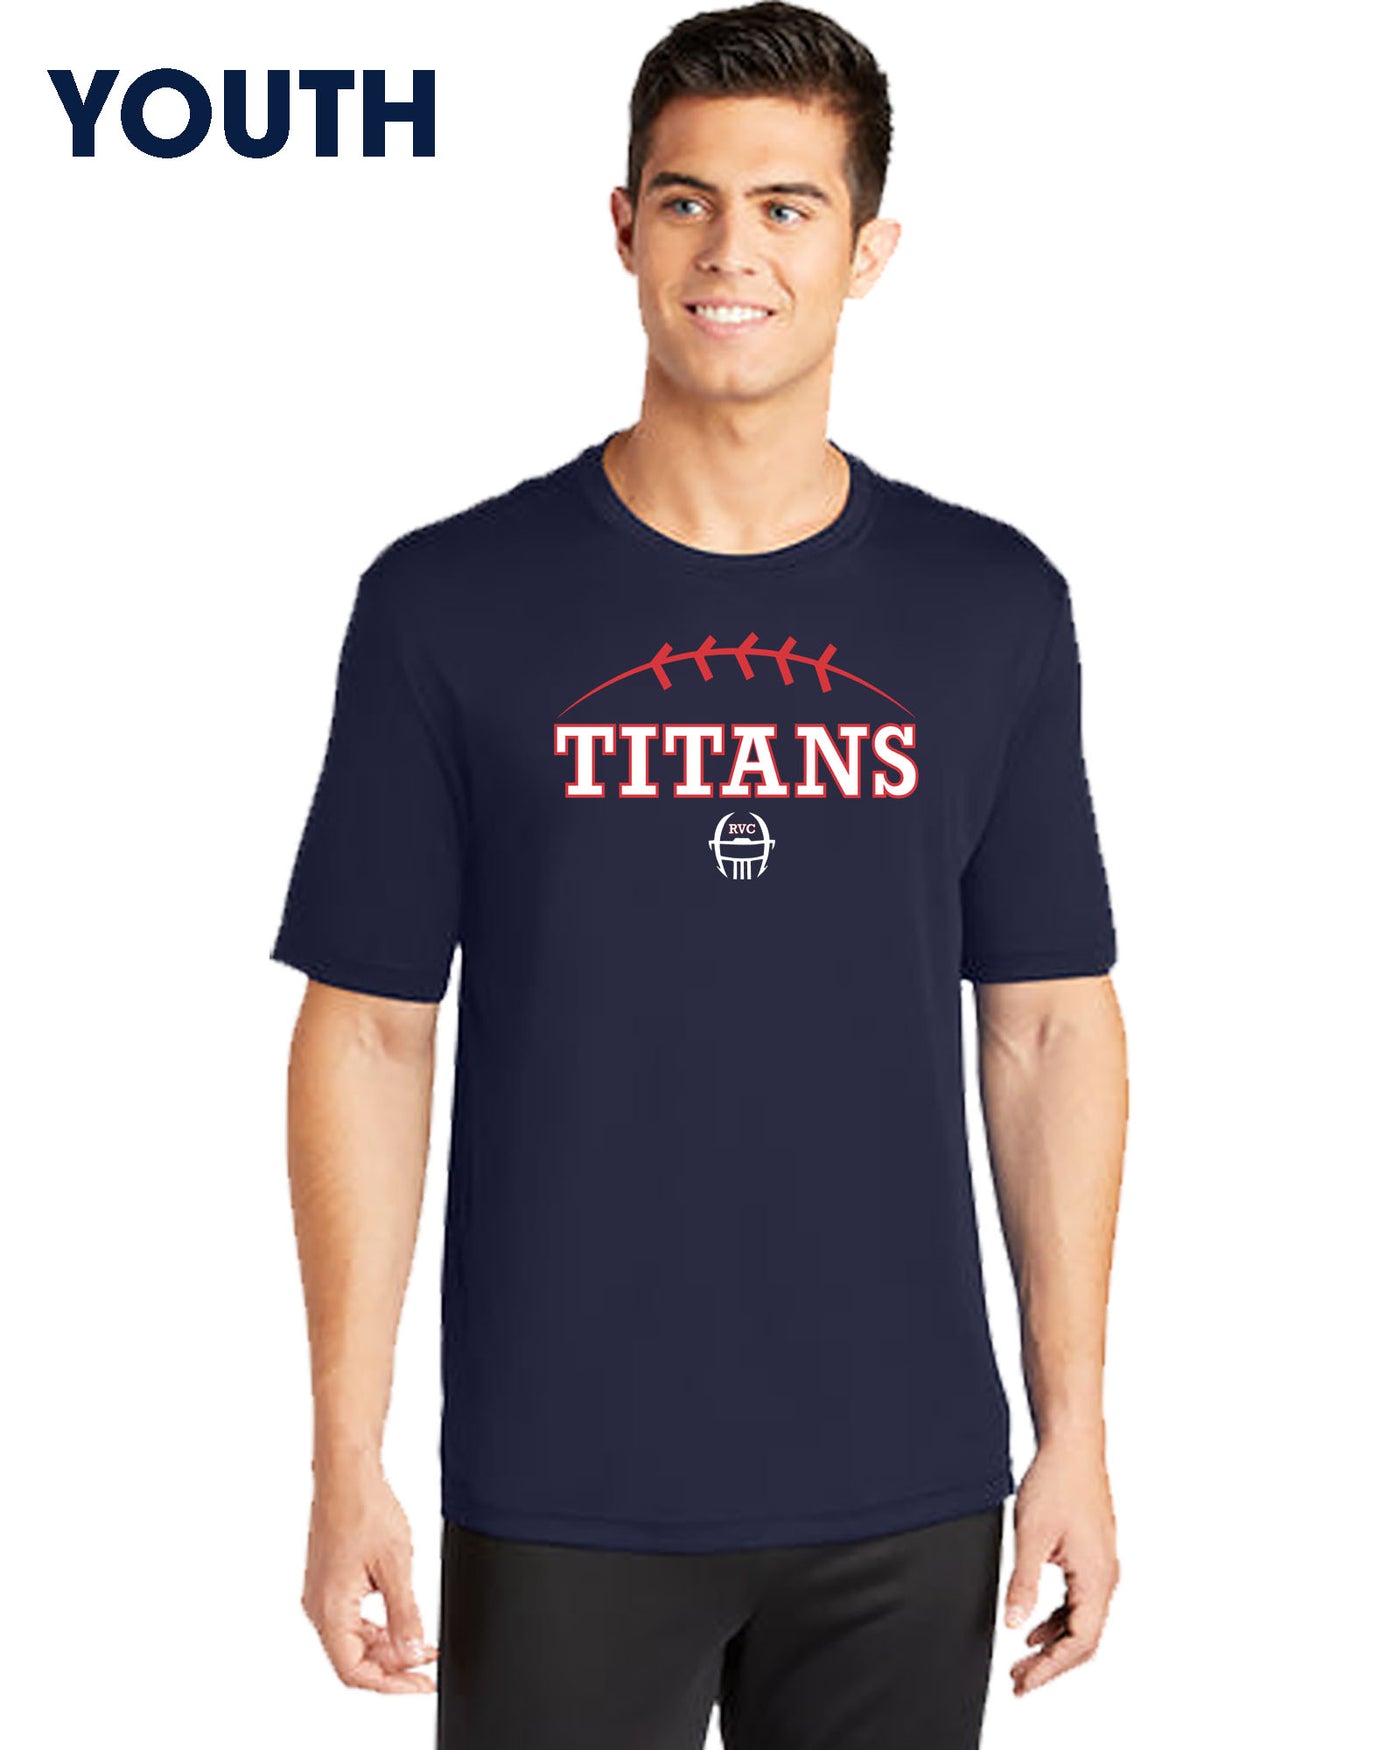 YOUTH Titans Classic Short Sleeve Performance Tee